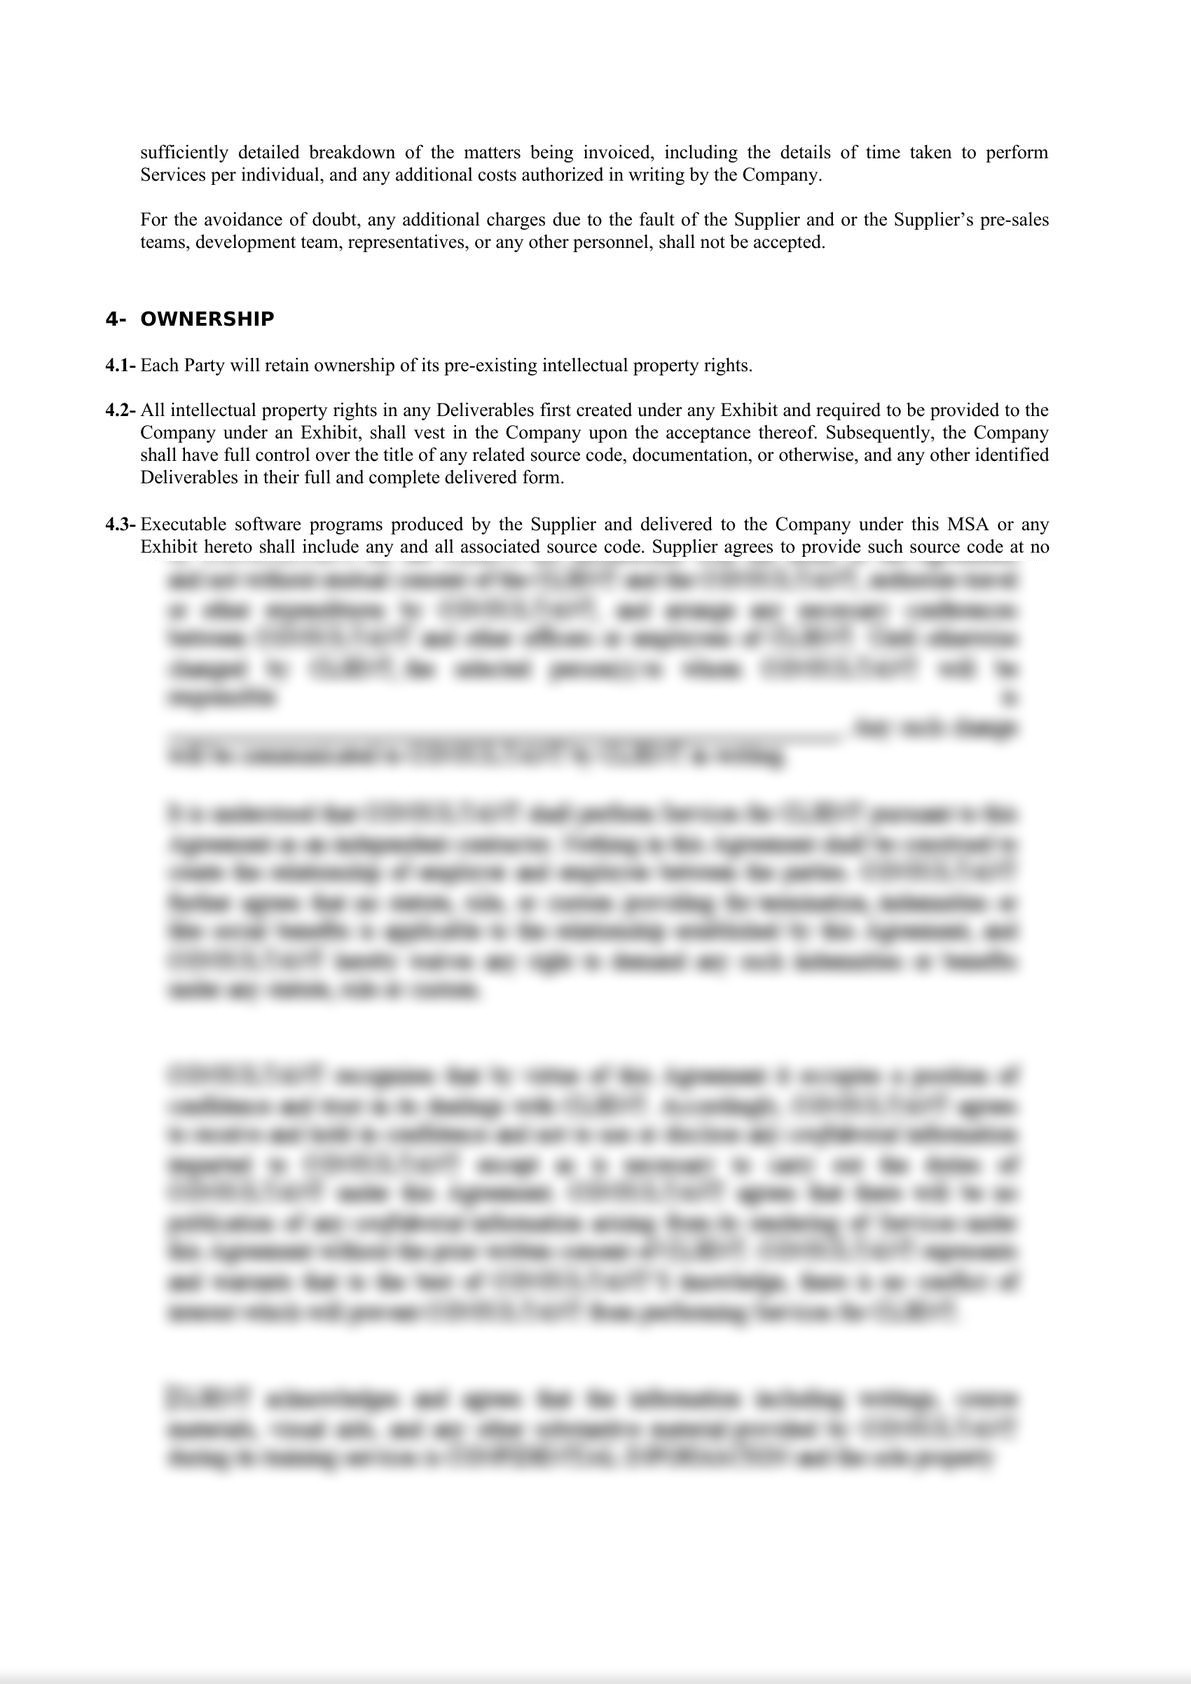 Master Service Agreement (Company / Supplier) -4